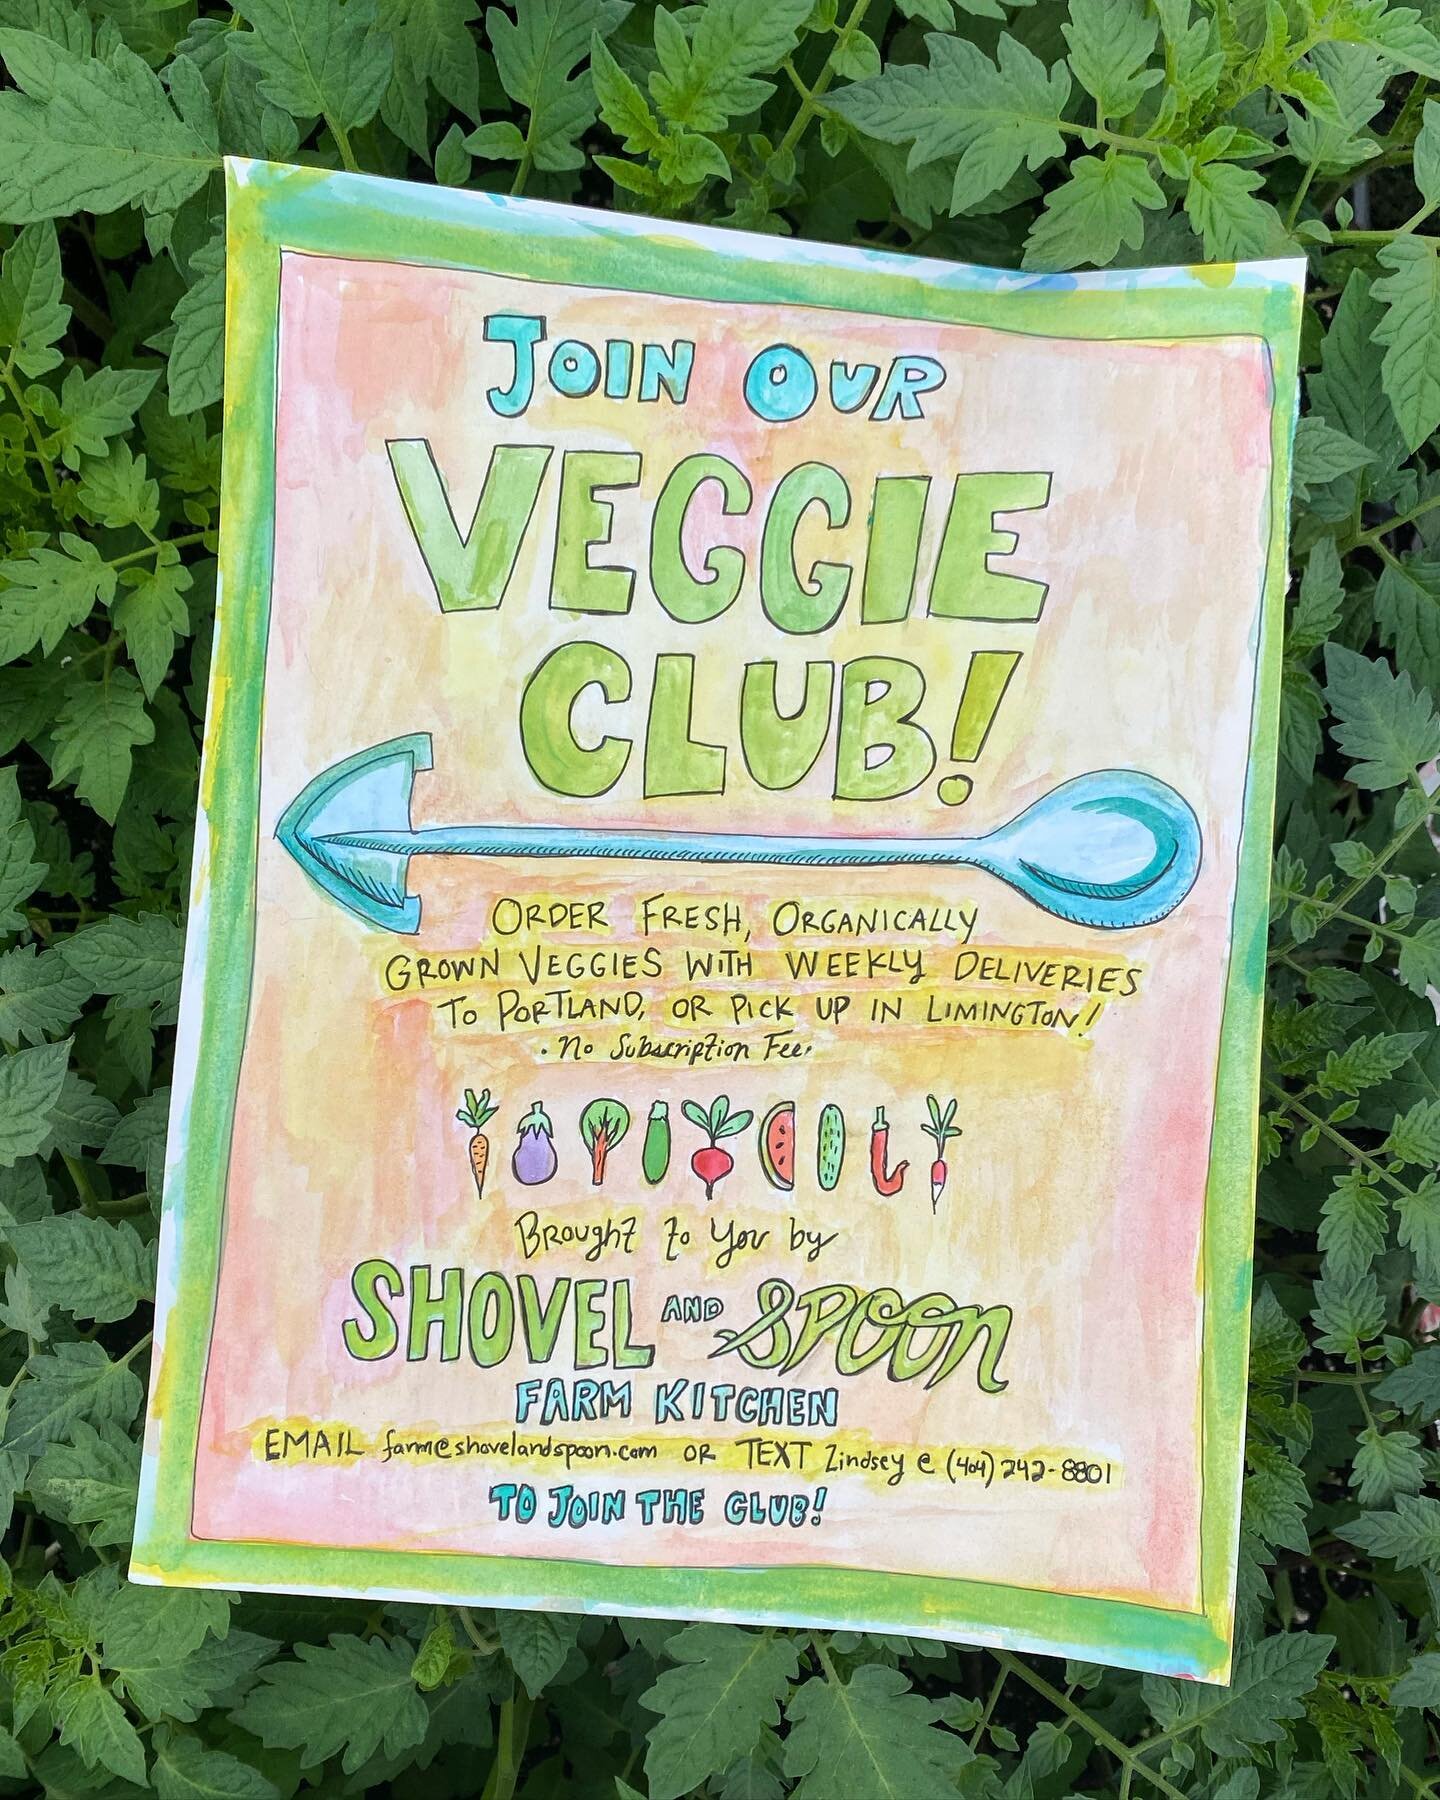 Friends! Looking for fresh, responsibly grown veggies to spruce up your summer meals? Join our Veggie Club! Order *whatever you want* with weekly pick up options in Portland or Limington. Email farm@shovelandspoon.com for more info or to join the clu